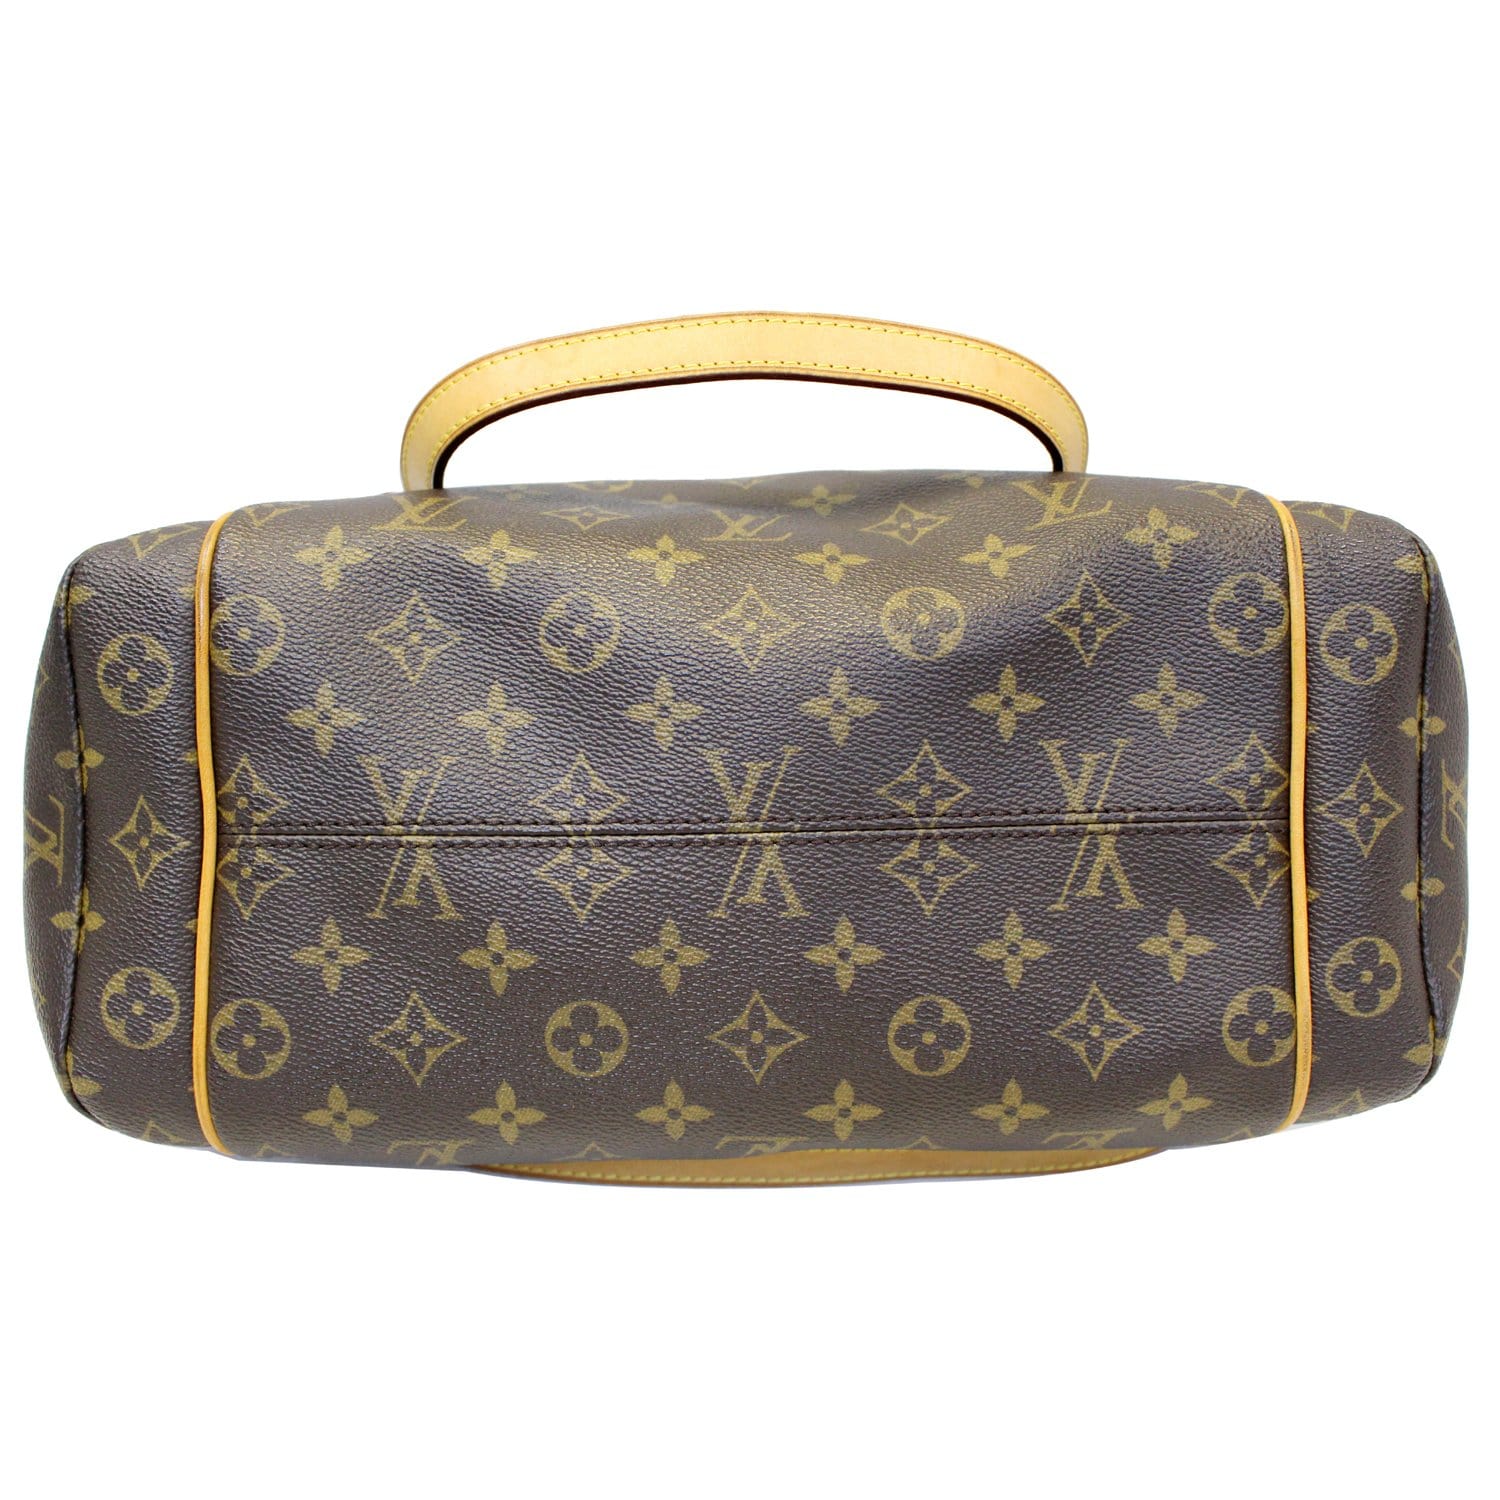 🔥Louis Vuitton Holiday Special Limited Edition Collectible GIANT Gift Bag